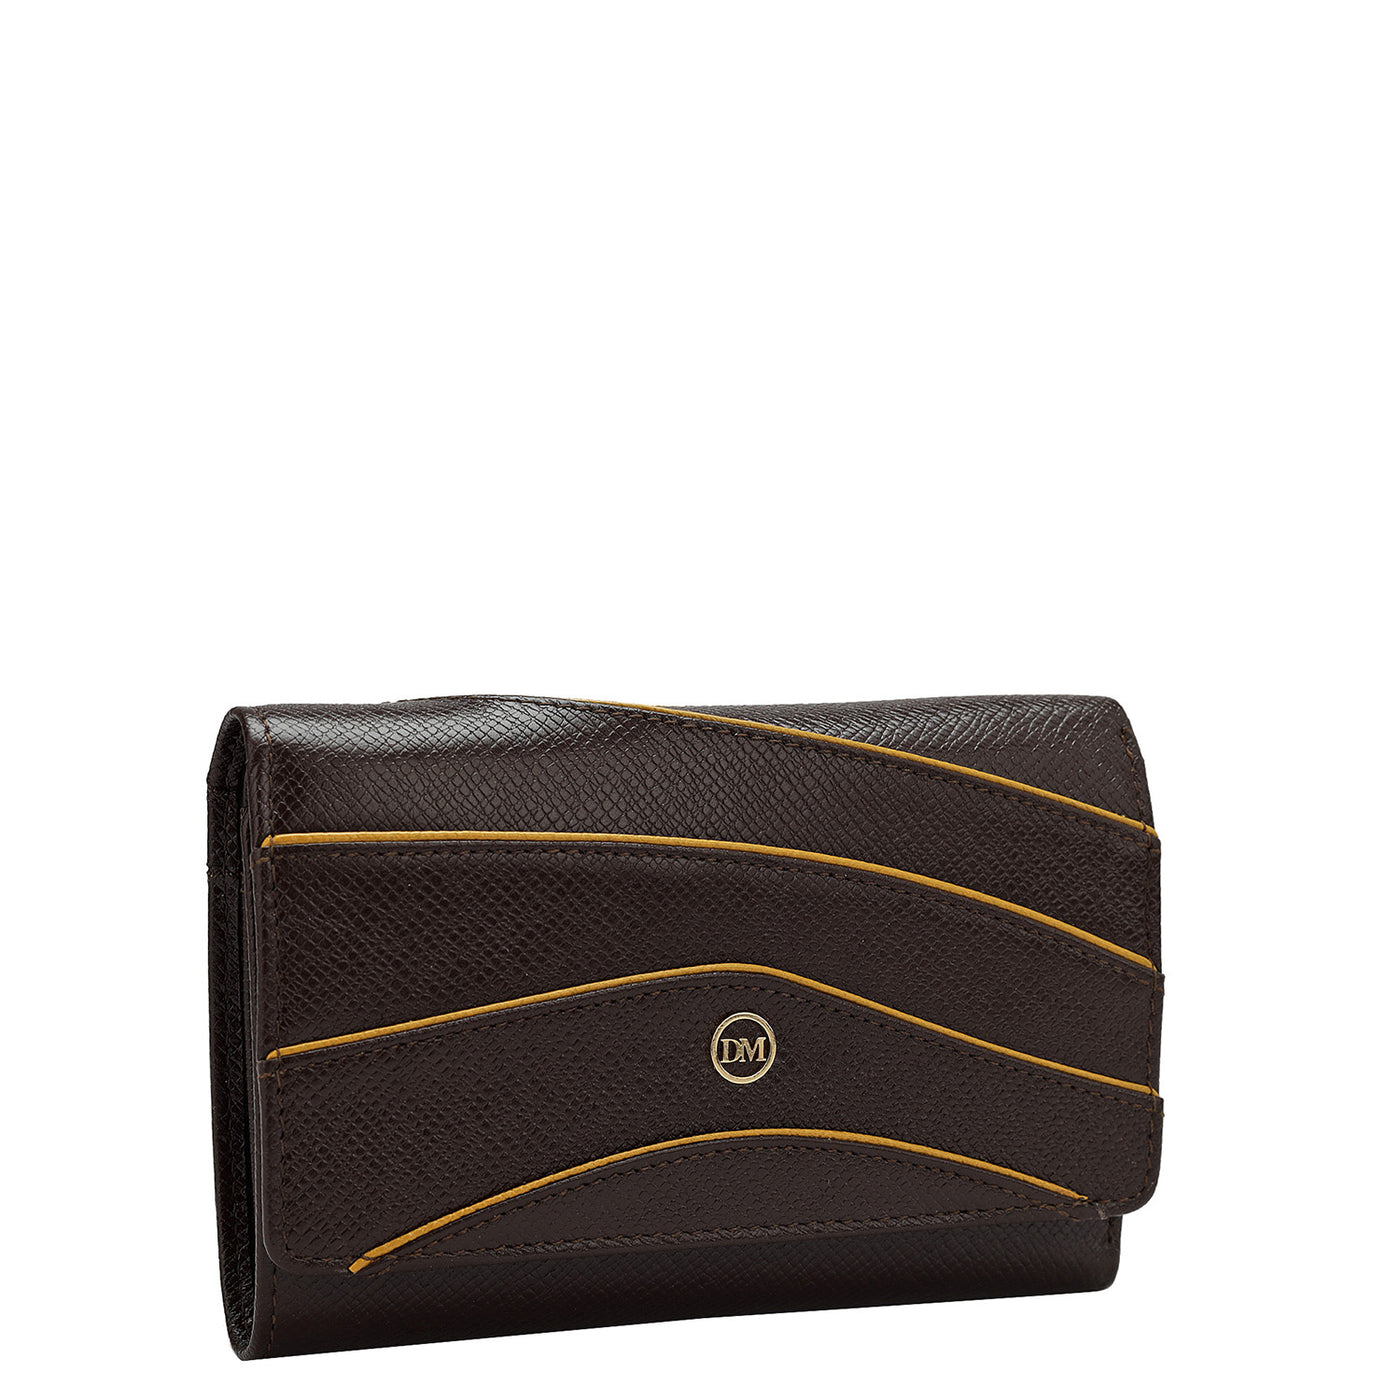 Franzy Leather Ladies Wallet - Chocolate